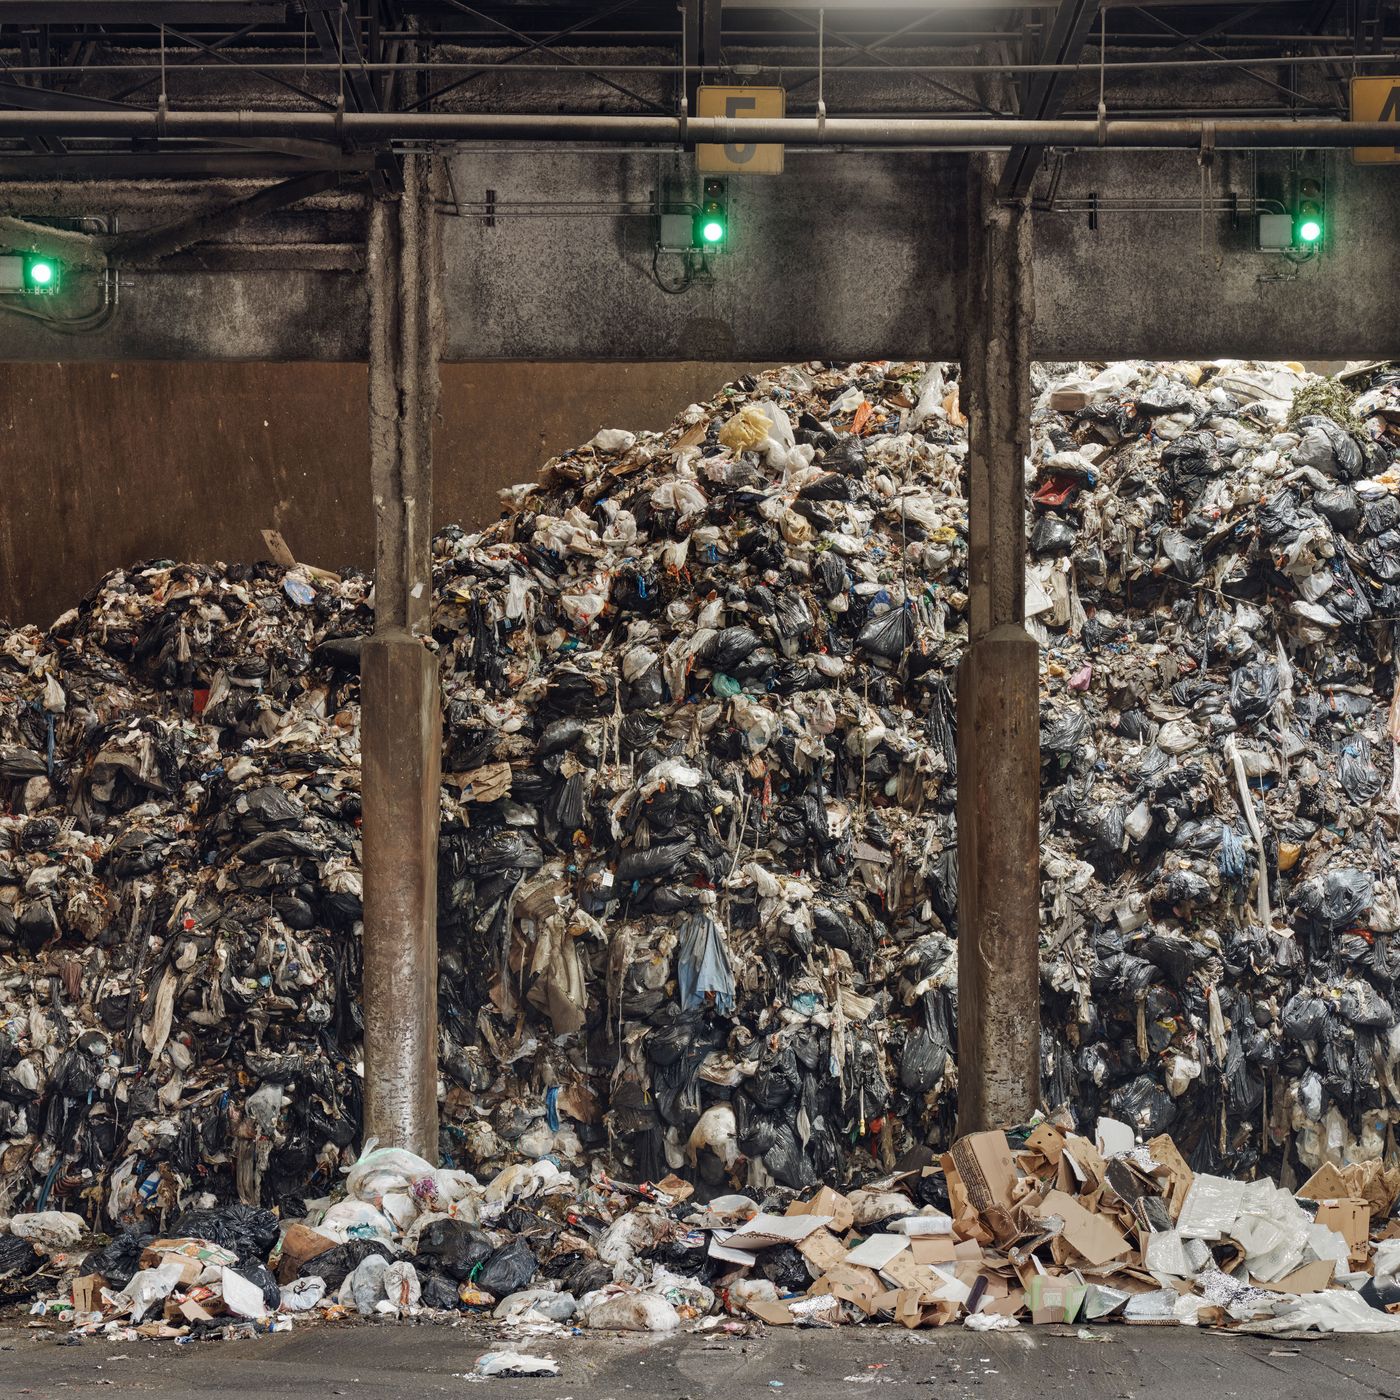 Voyage of the Gross: Where New York City's Trash Goes